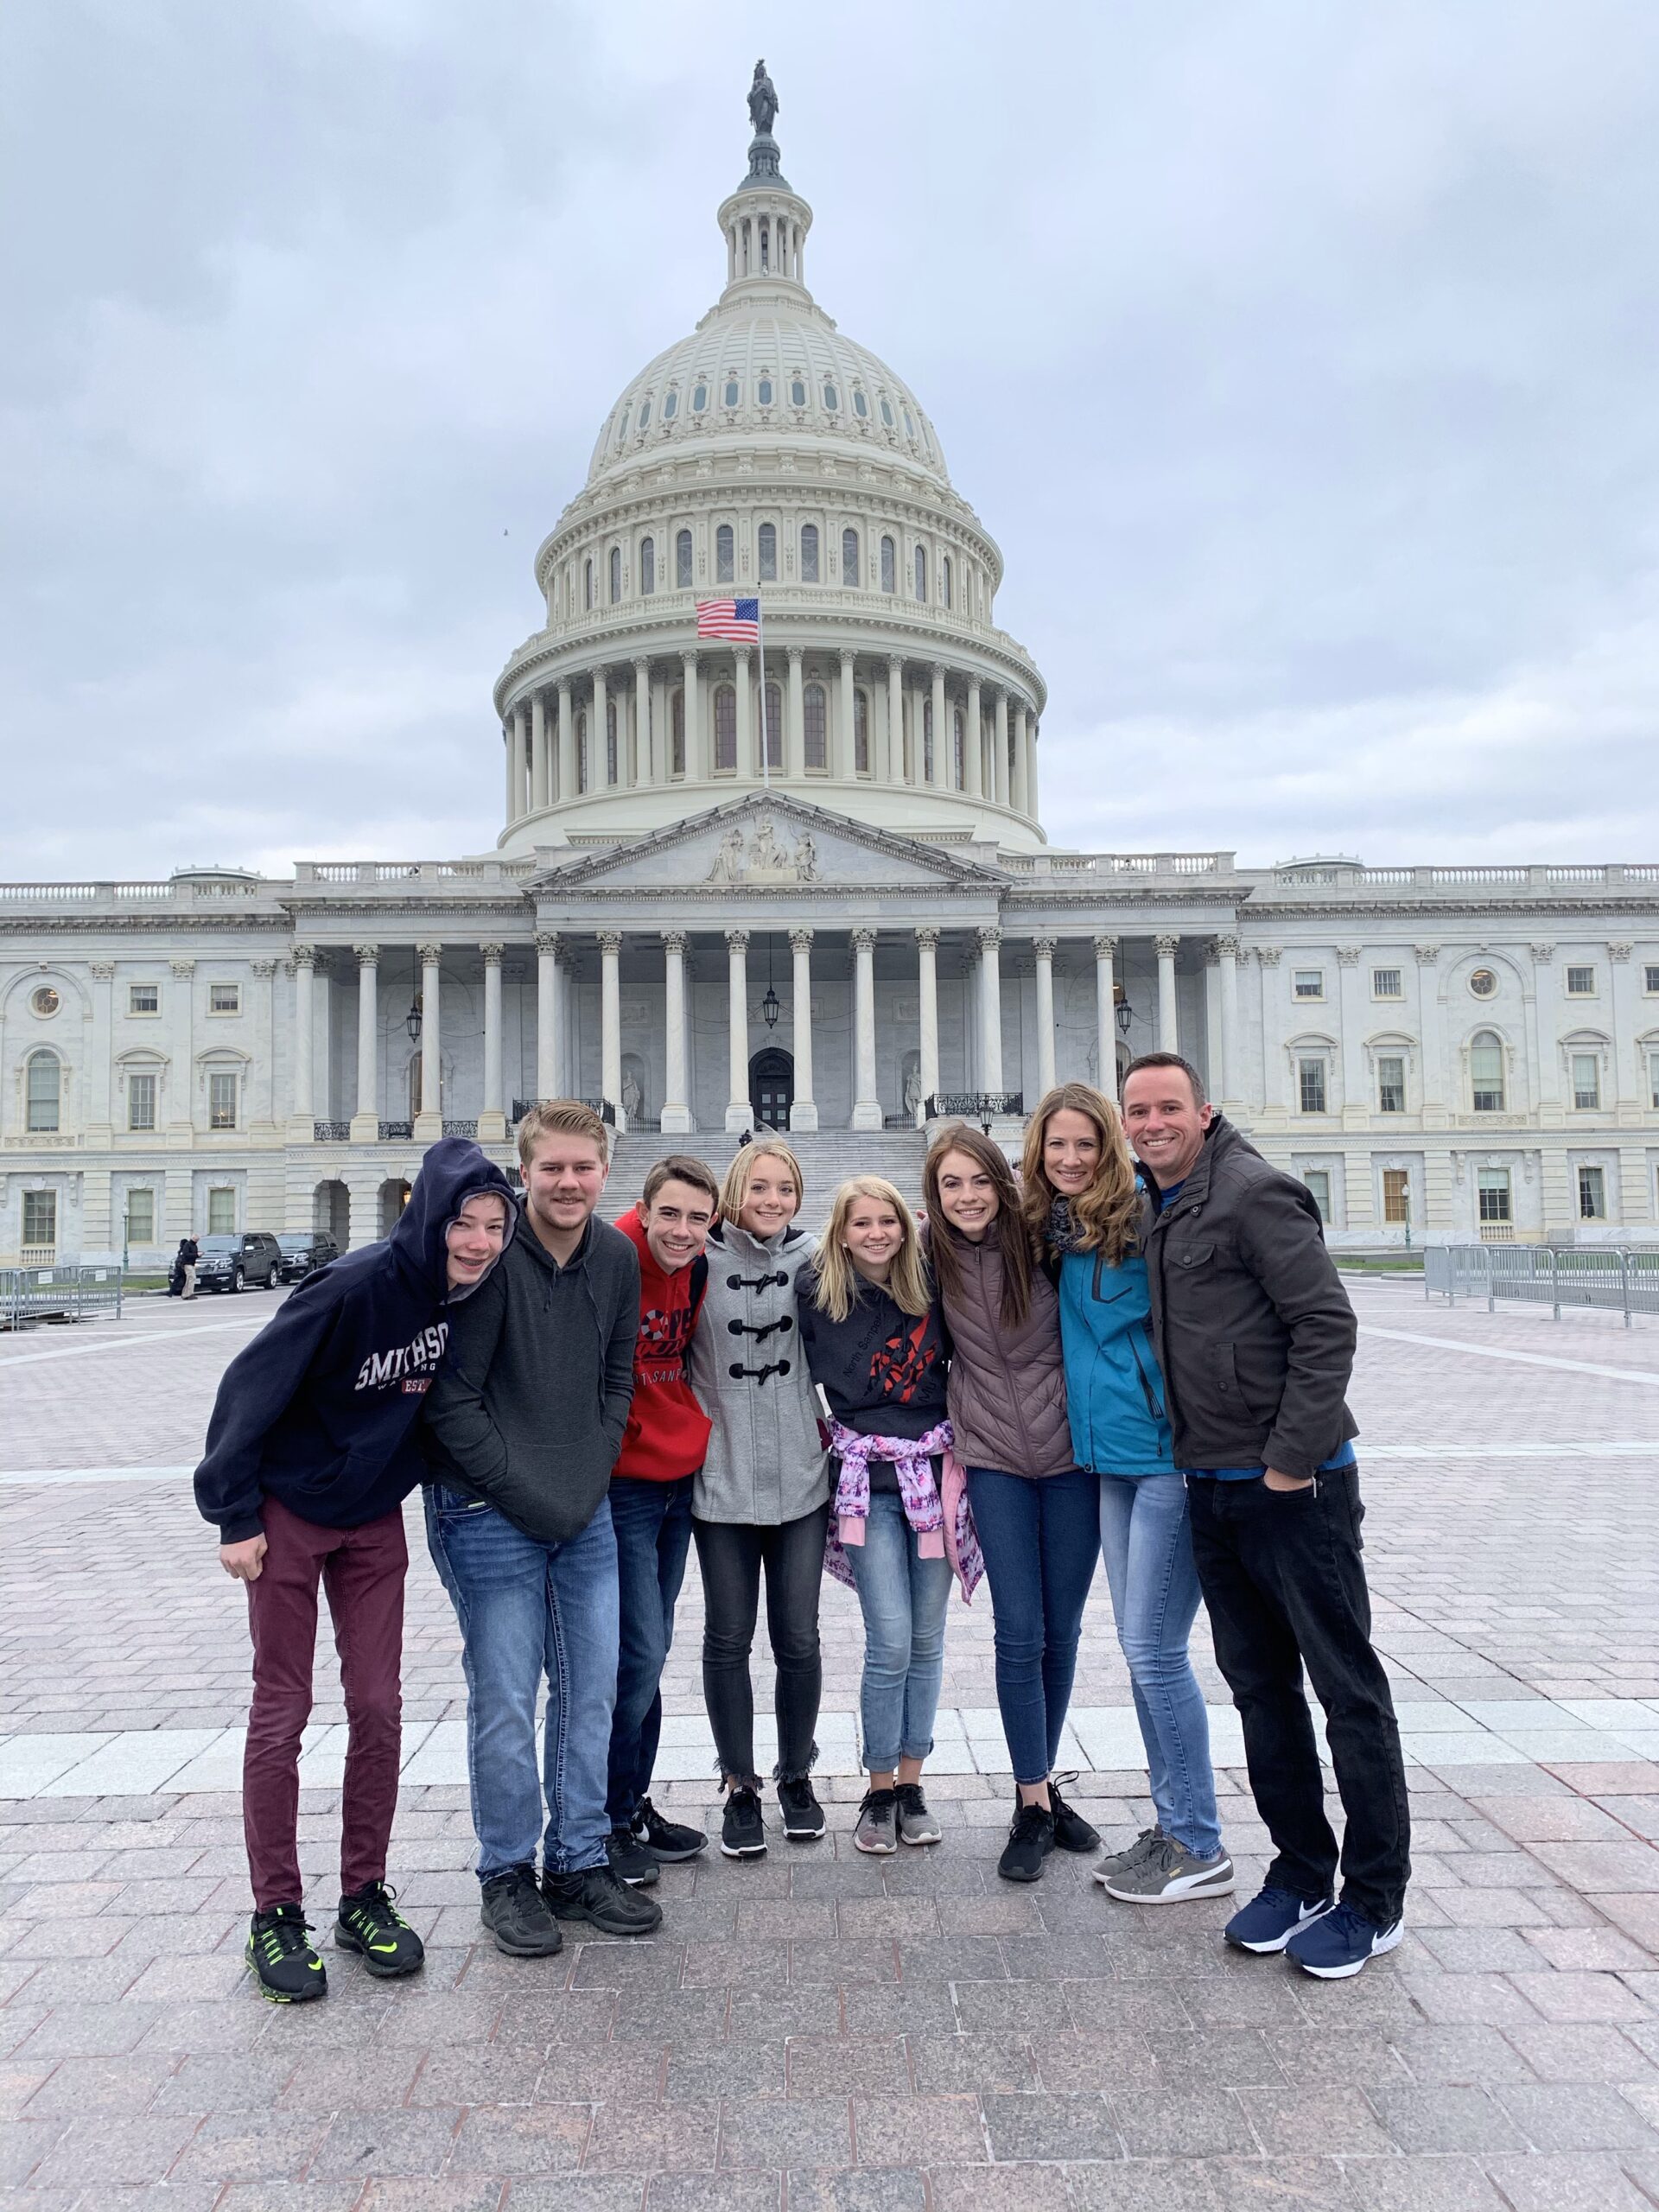 Exciting trip to Capitol brings new ideas to leadership